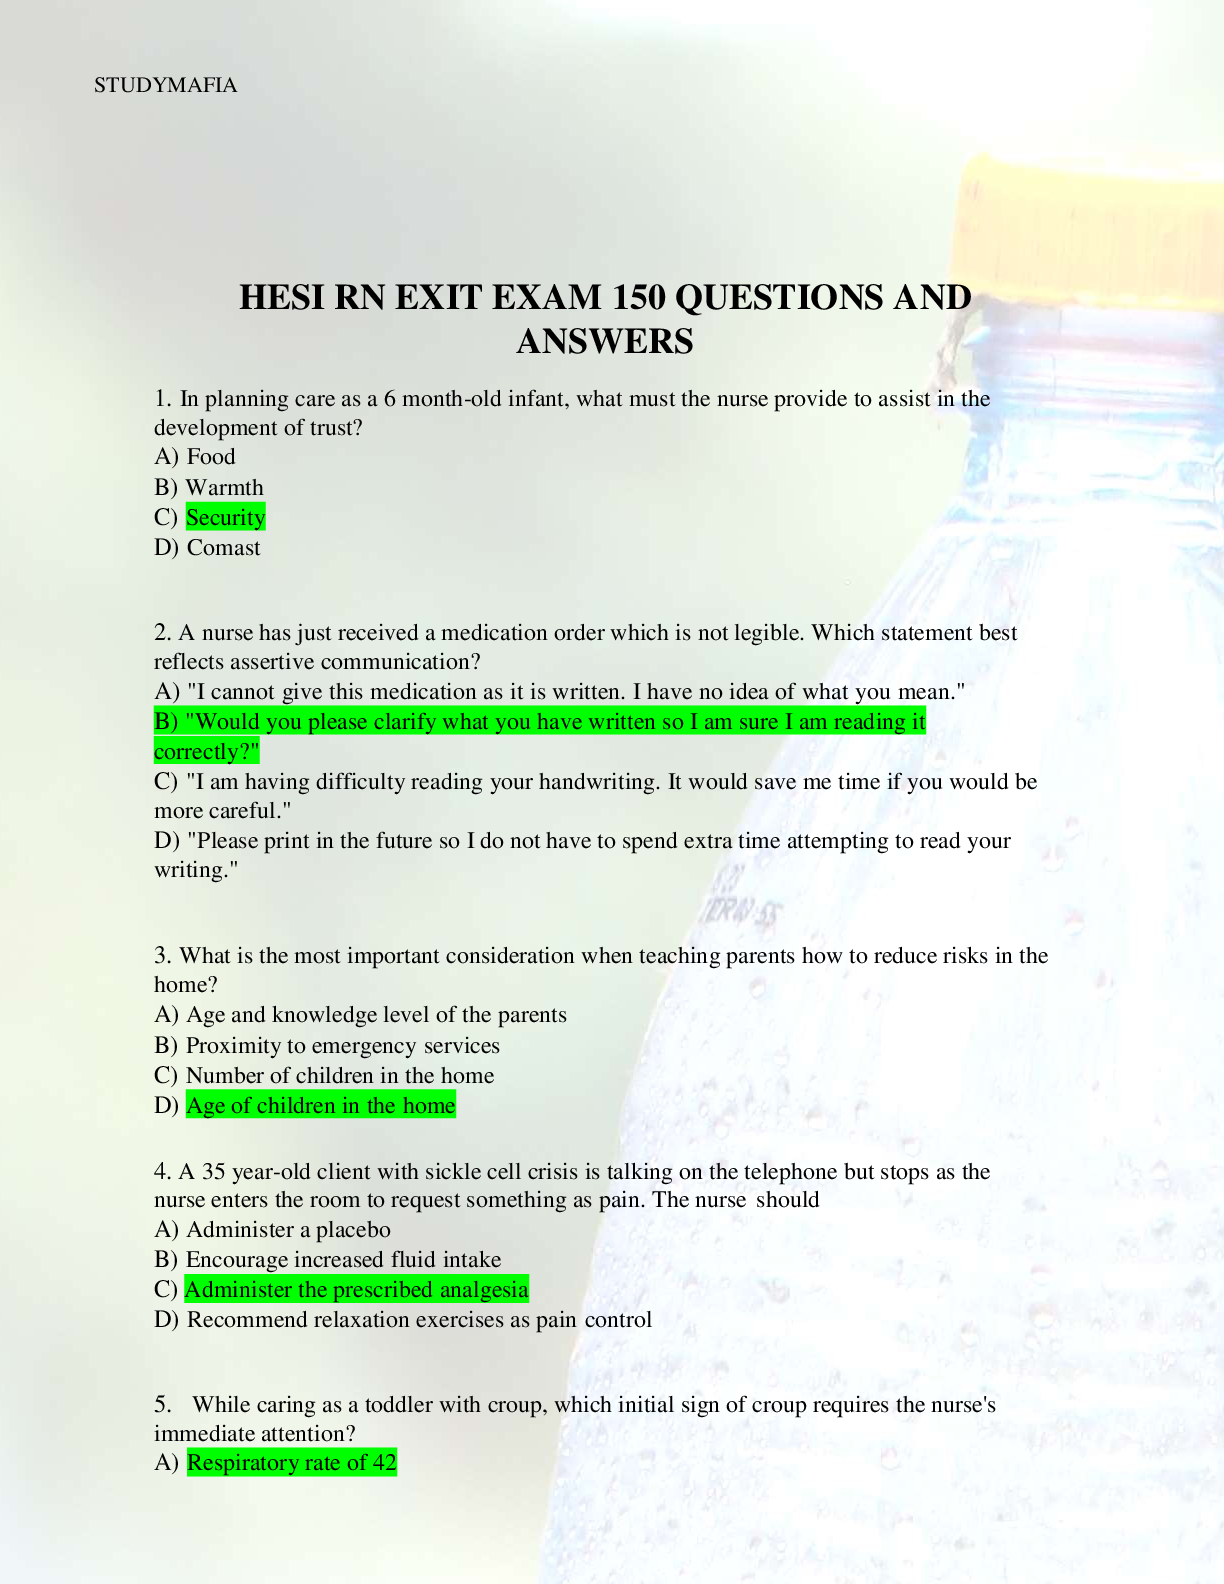 HESI RN EXIT EXAM 150 QUESTIONS AND ANSWERS Browsegrades